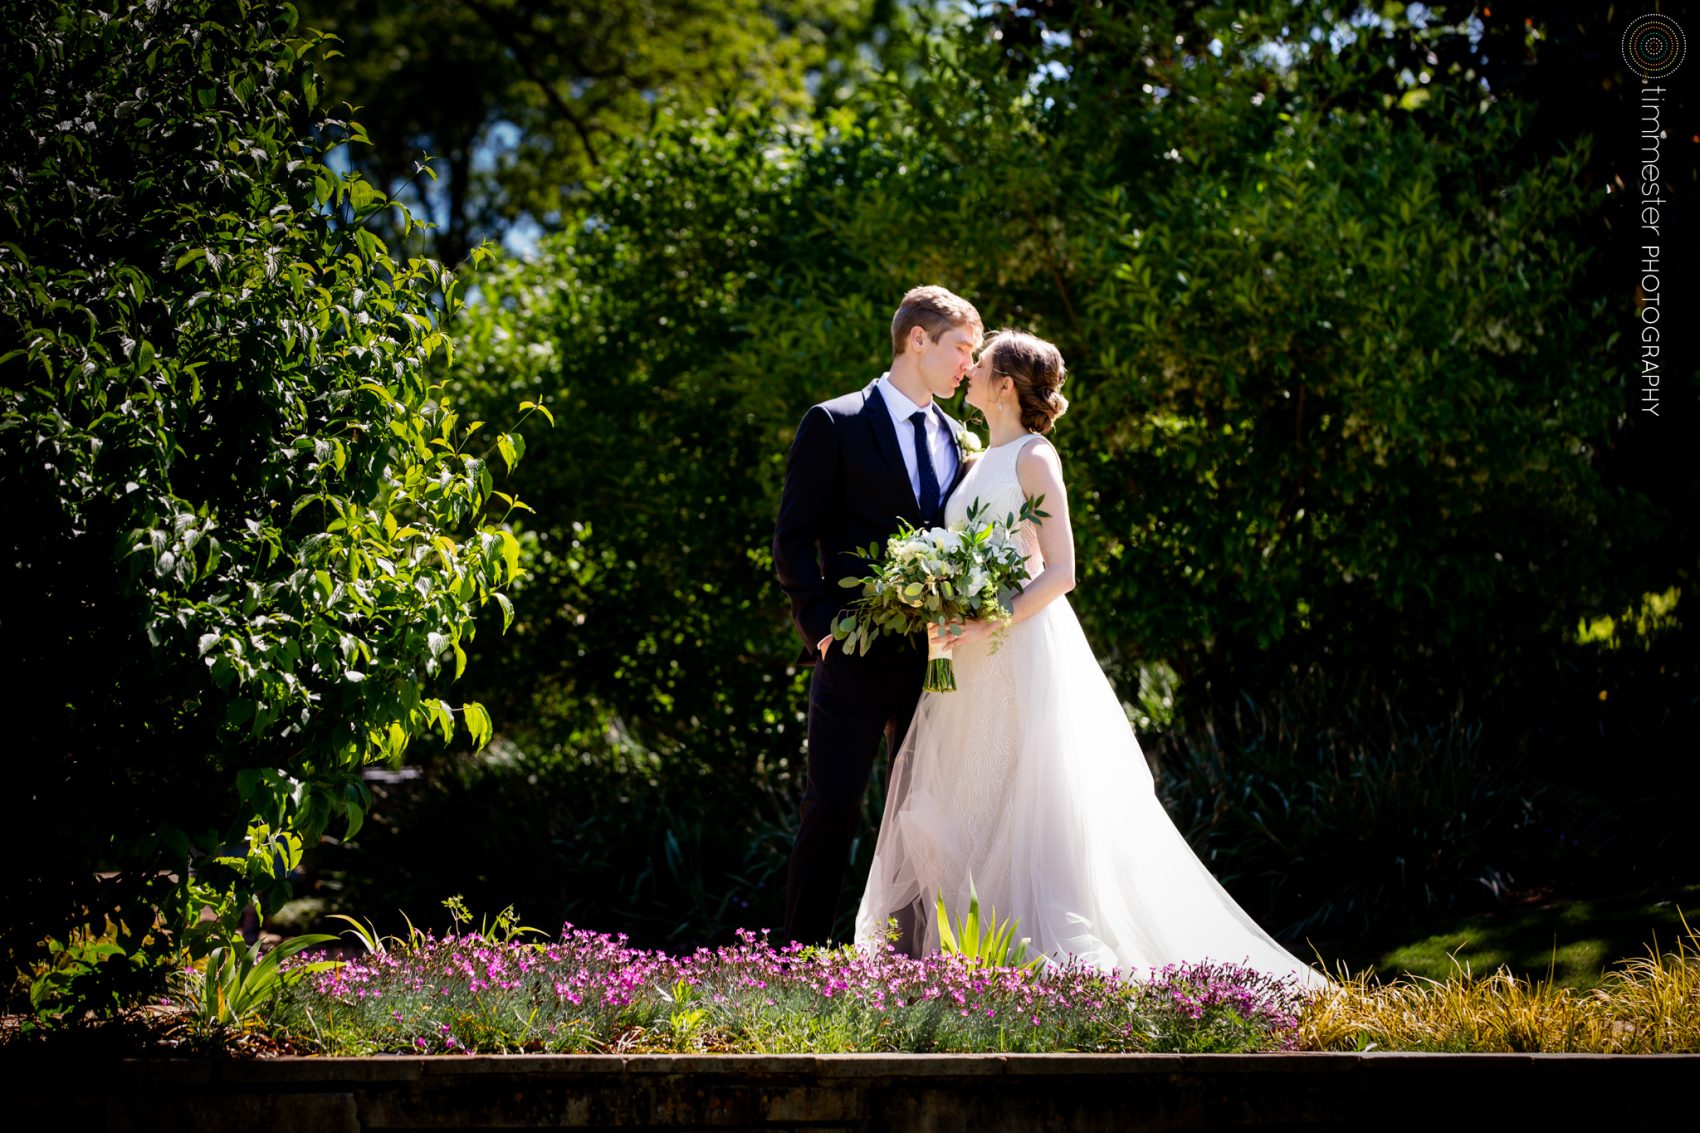 An outdoor garden ceremony in Raleigh with portraits of the bride and groom at Fred Fletcher Park.